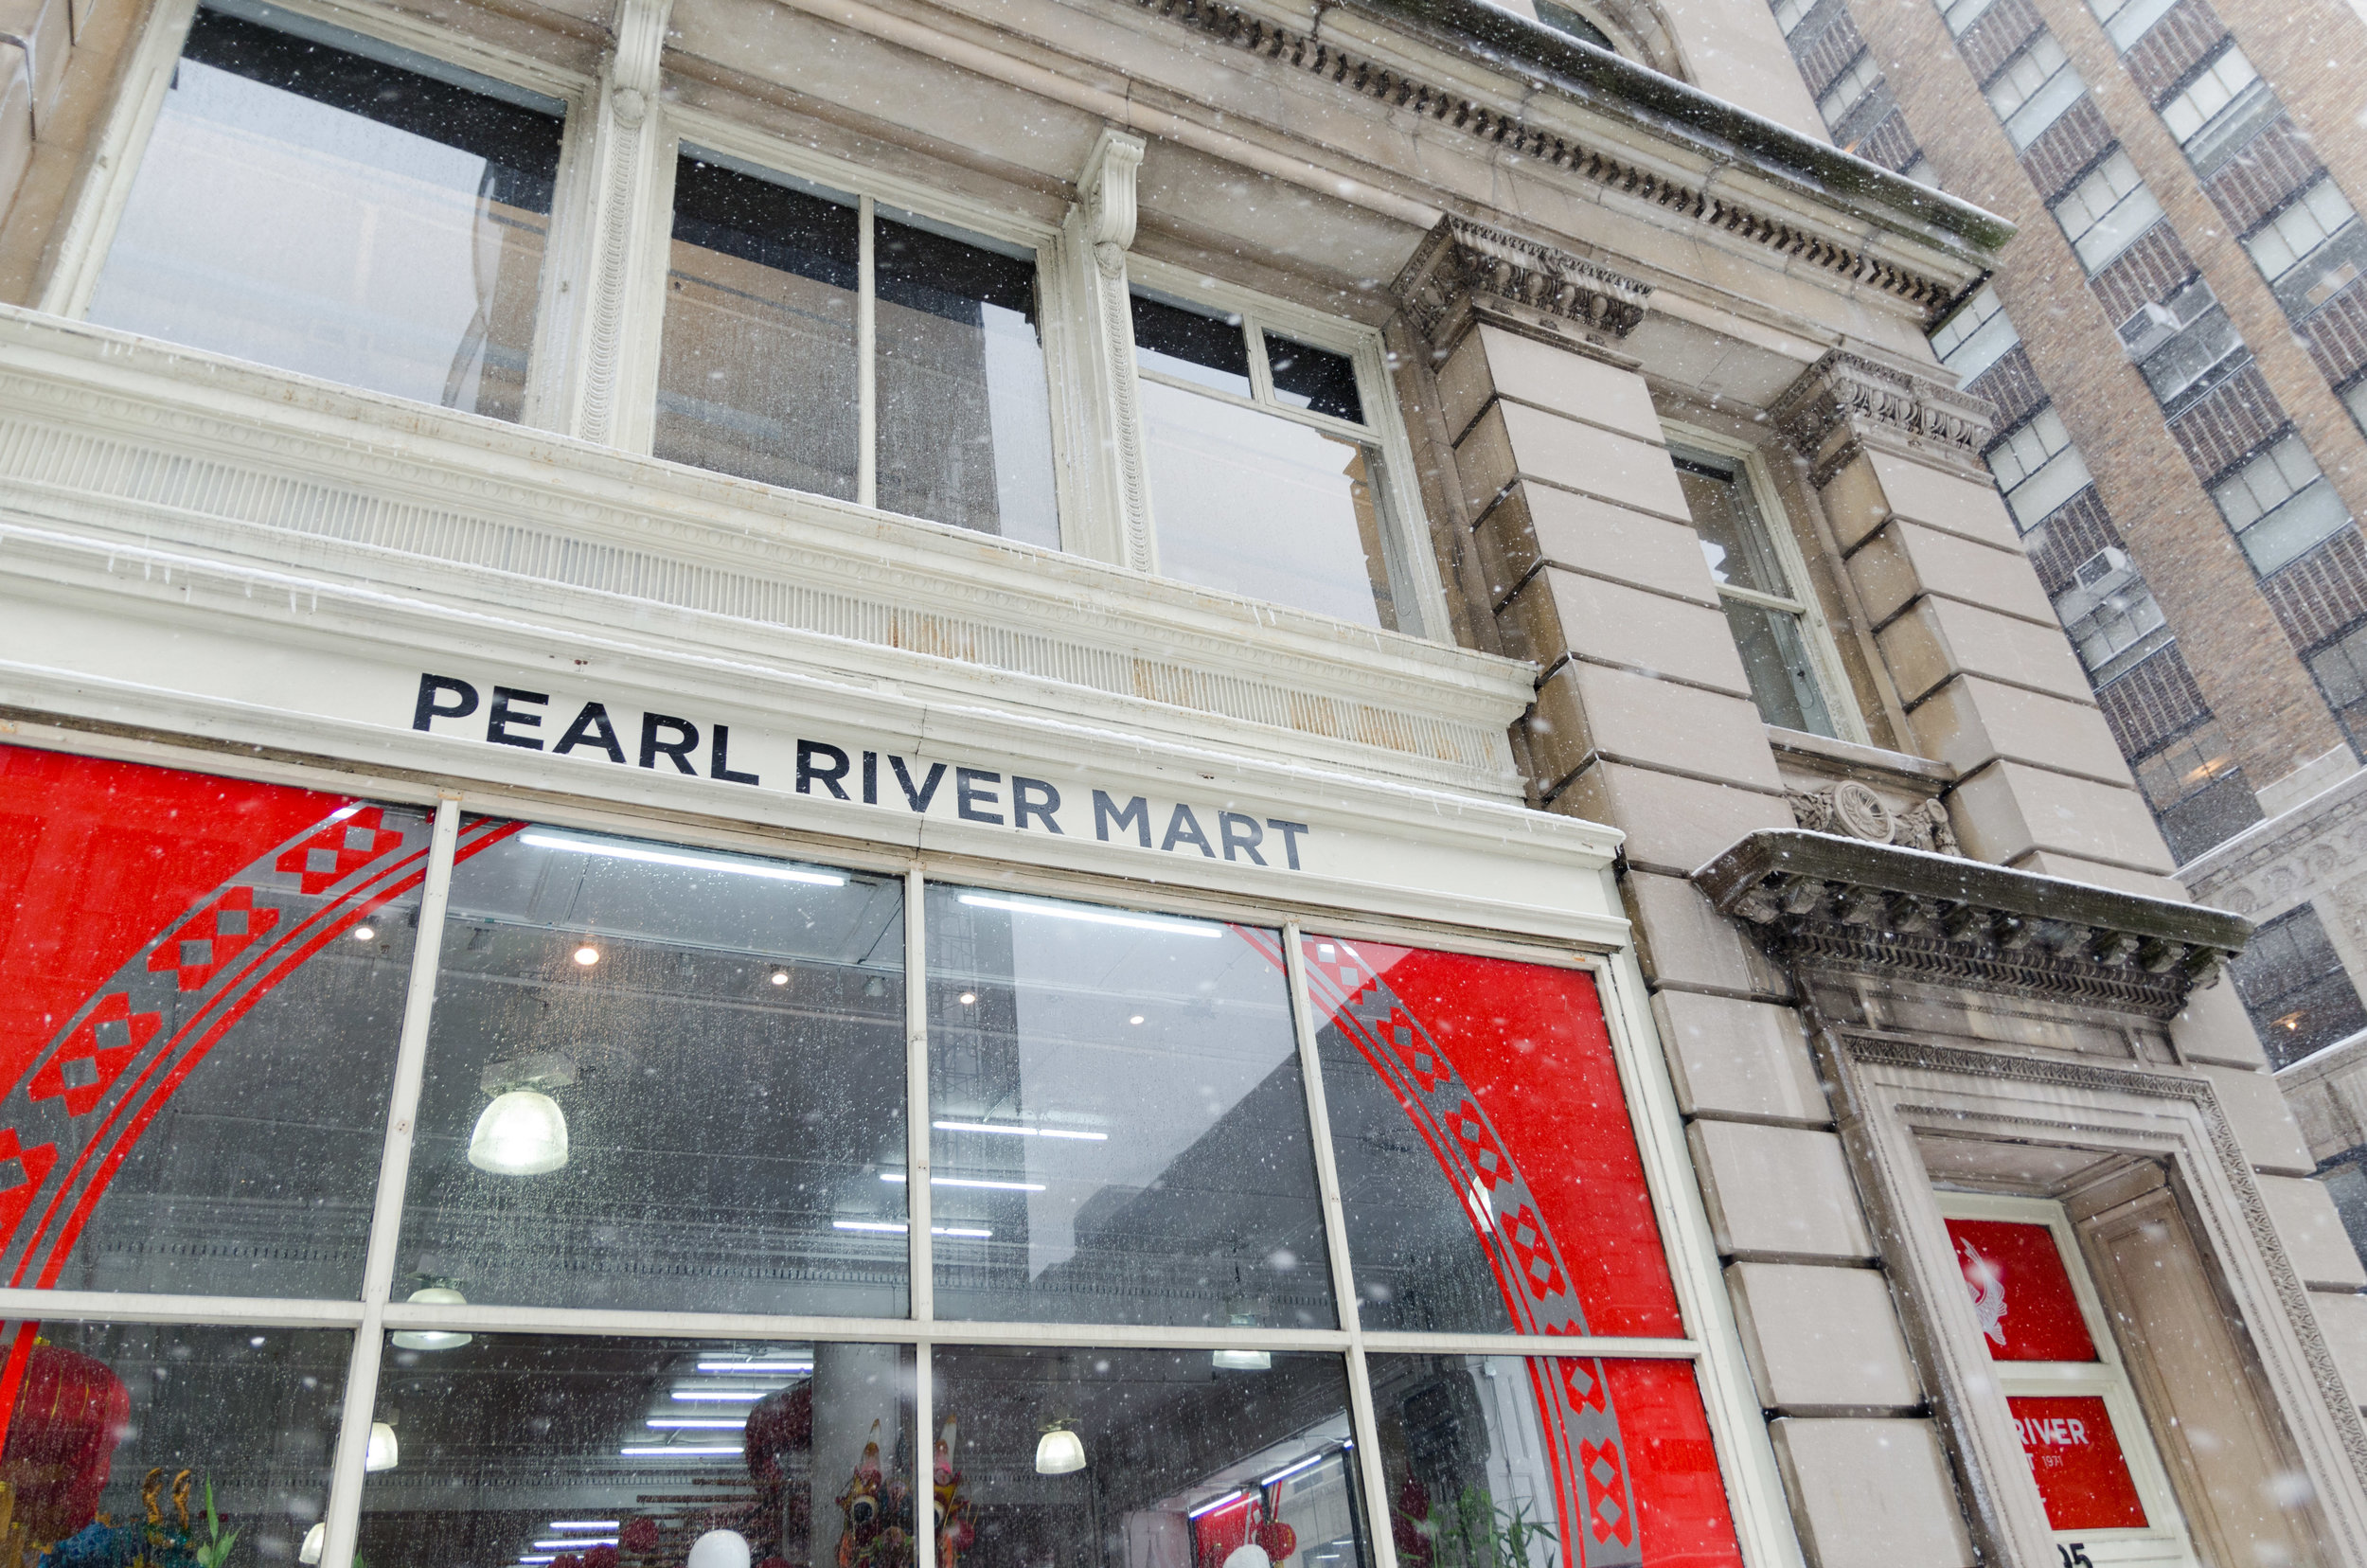  TRA studio Architecture, Pearl River Mart, NYC, New York City,&nbsp;Modern, Renovation, Construction, Design, Retail, Storefront, Tribeca 